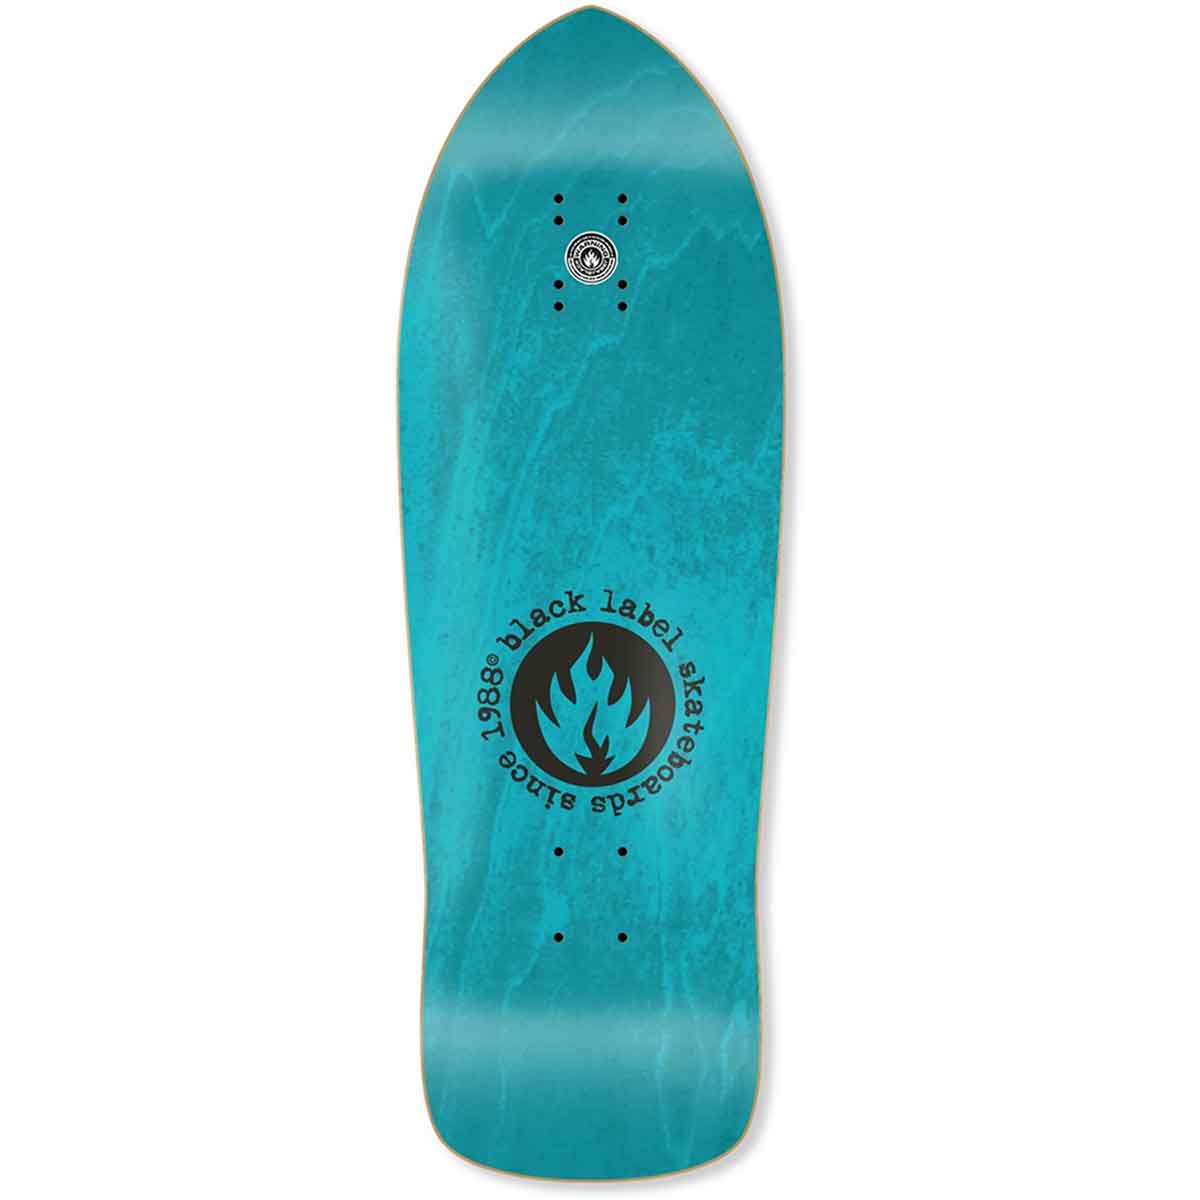 10.25x31.5 Black Label 35 Years Can 1989 Riky Shape Deck - Aqua Stain